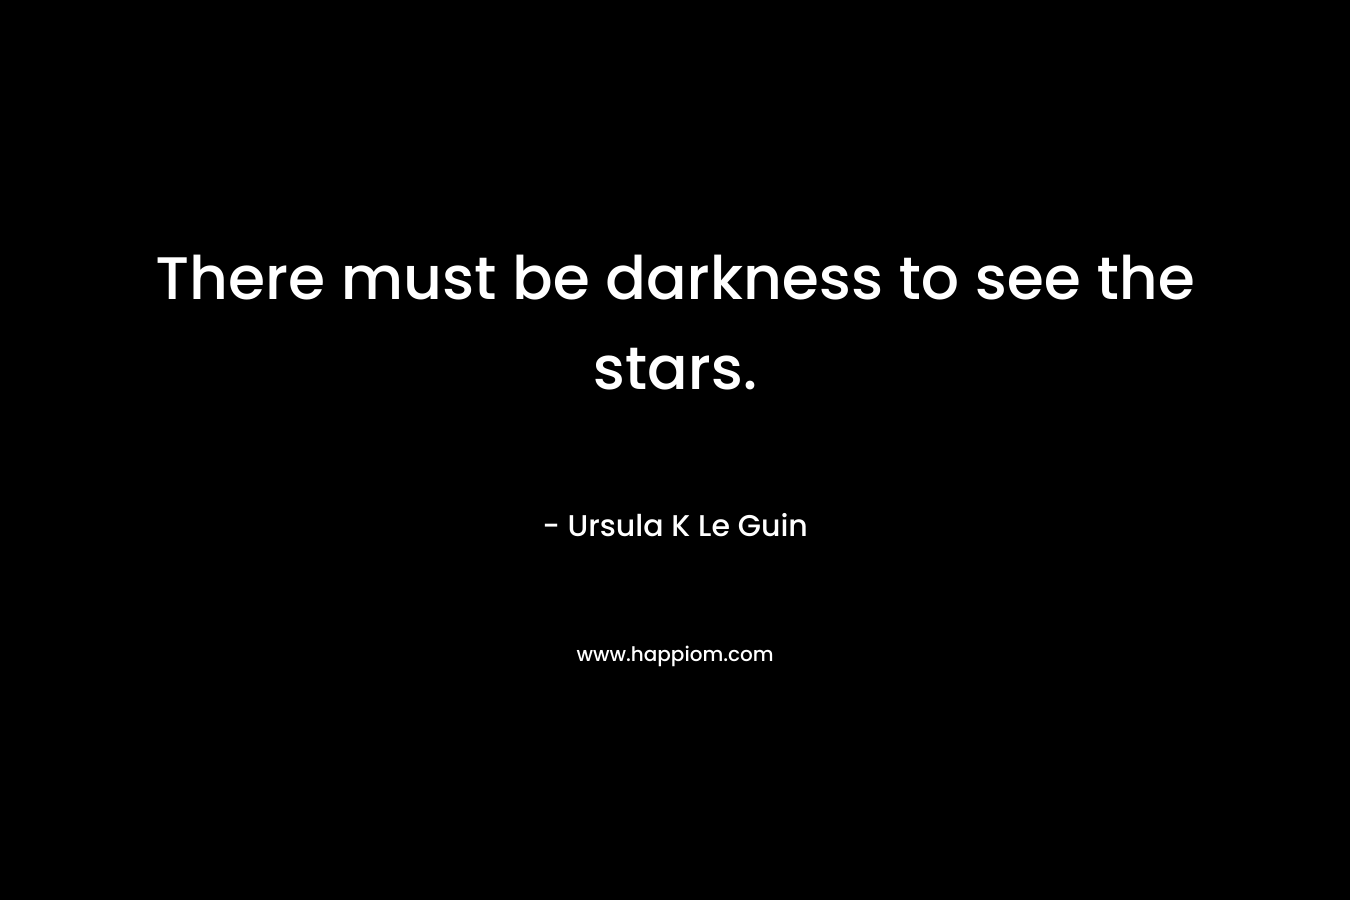 There must be darkness to see the stars.